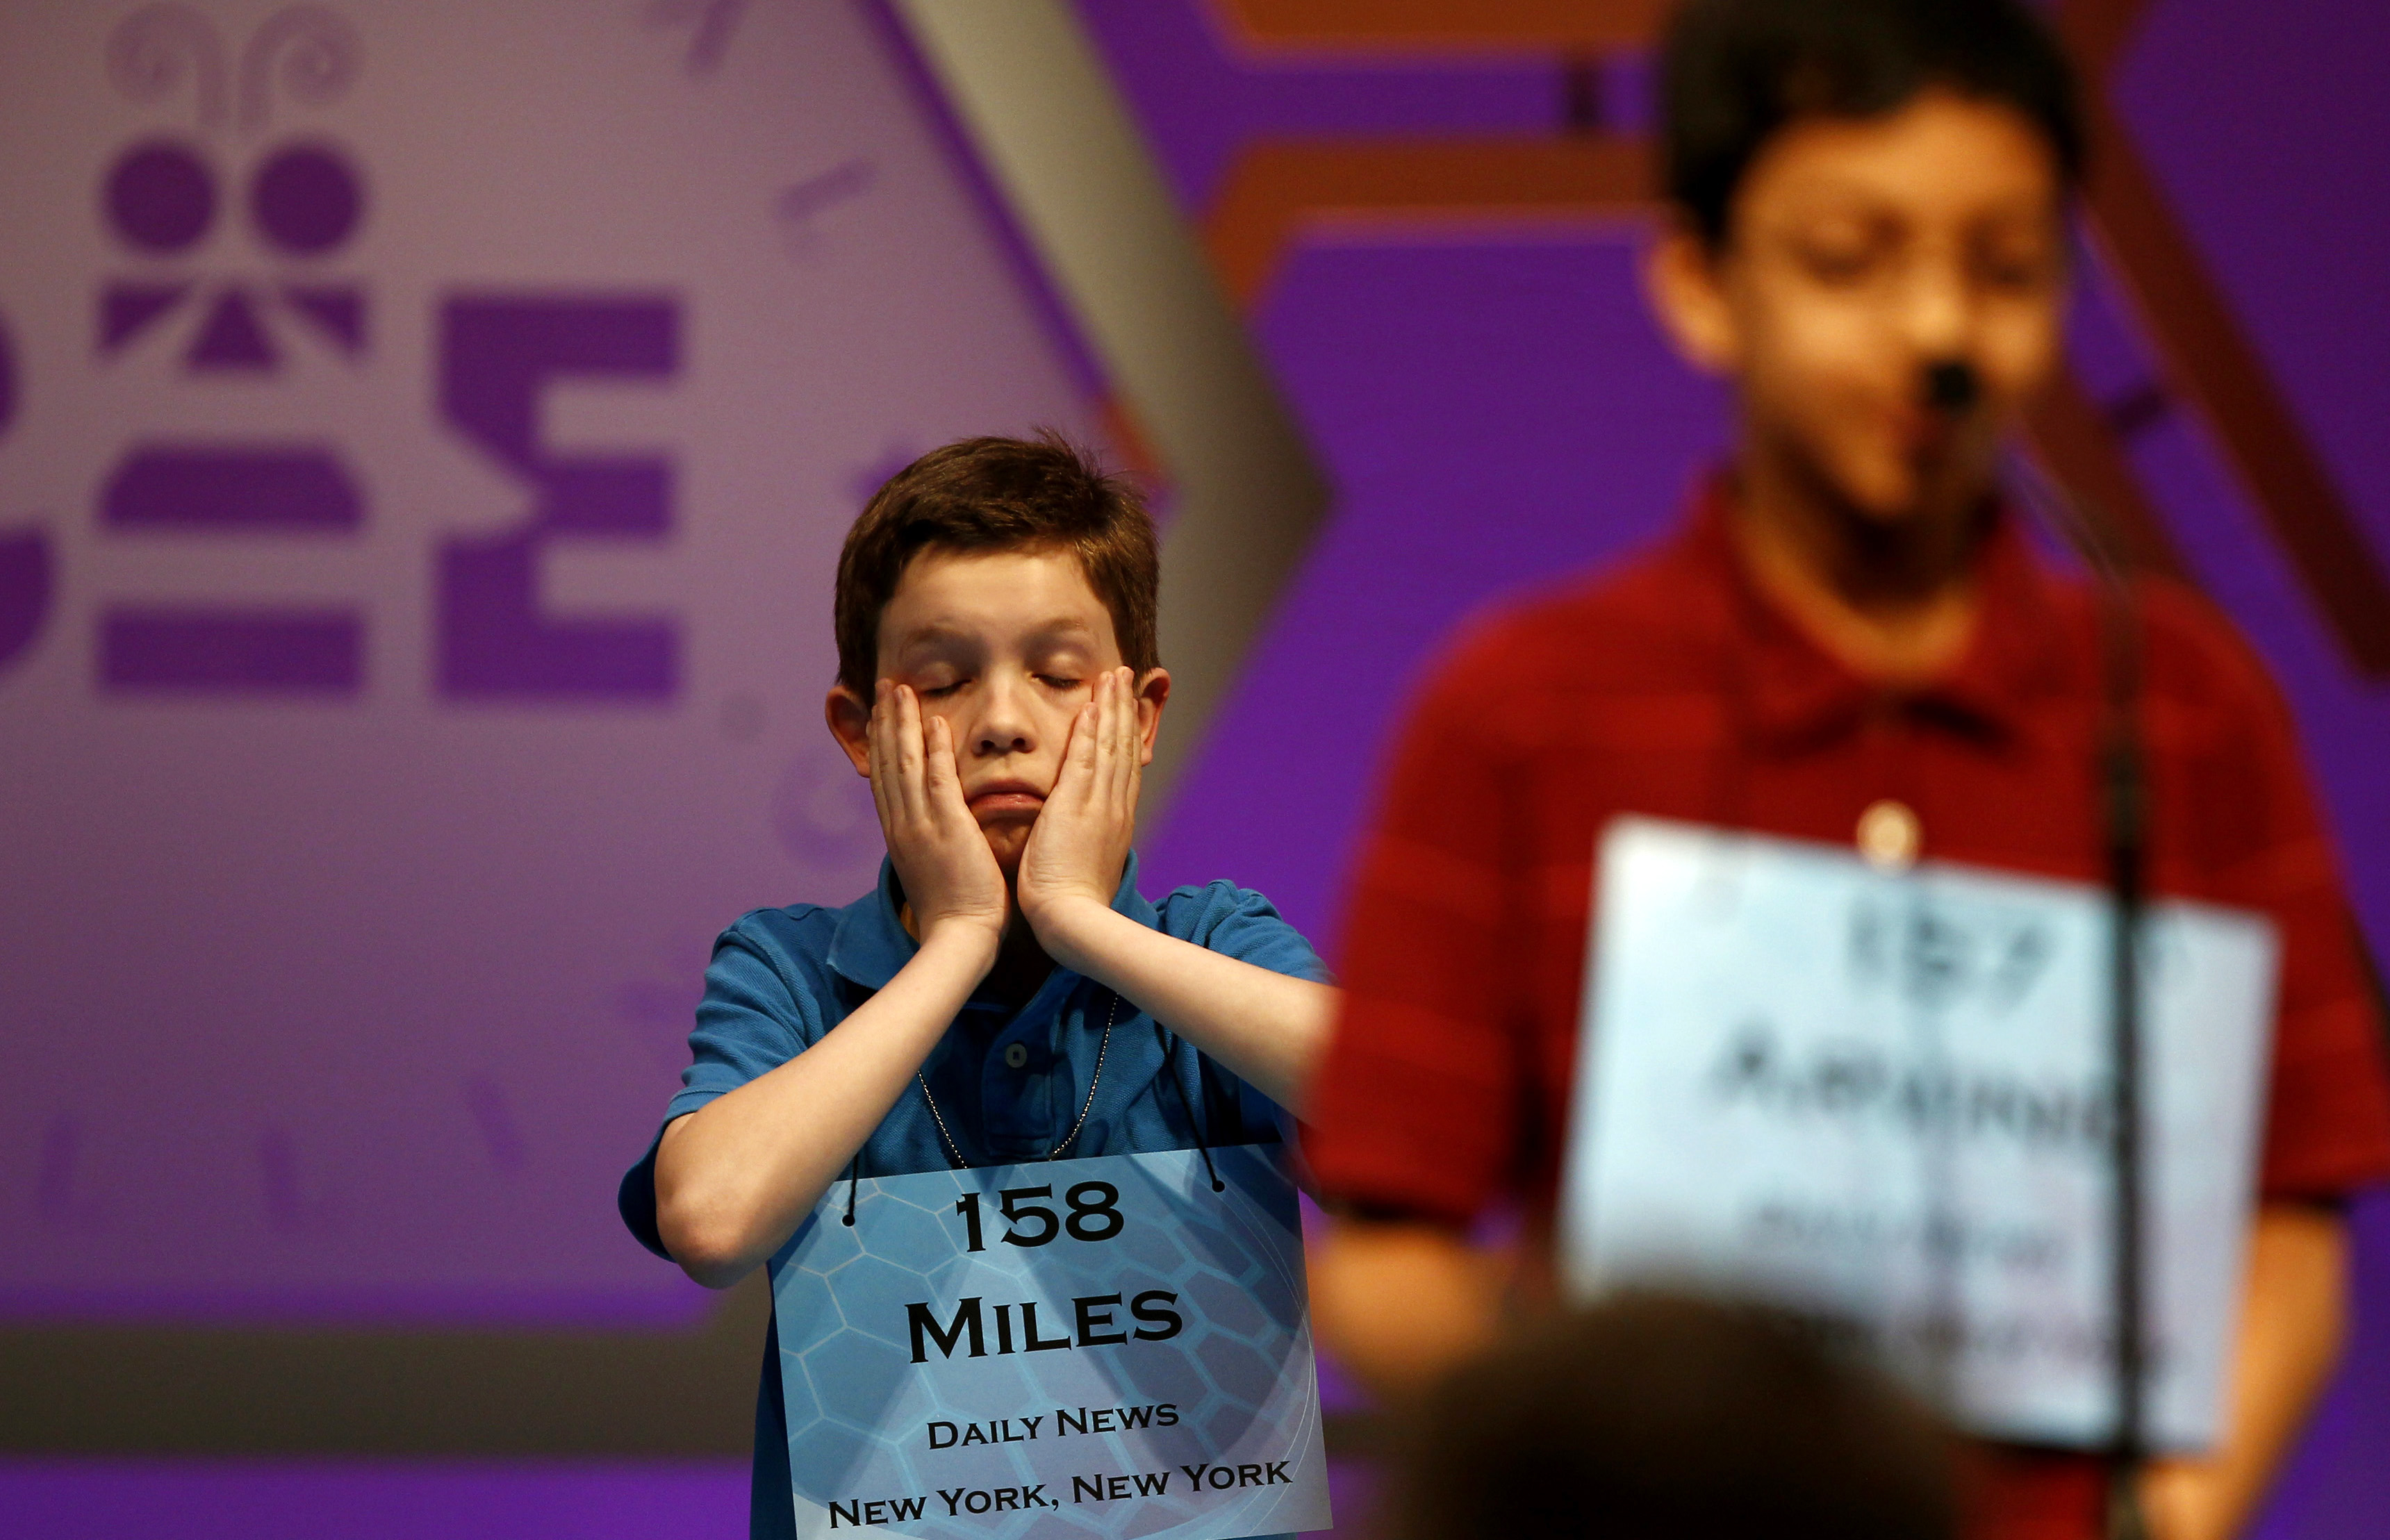 A boy competes in the 2011 Scripps National Spelling Bee.